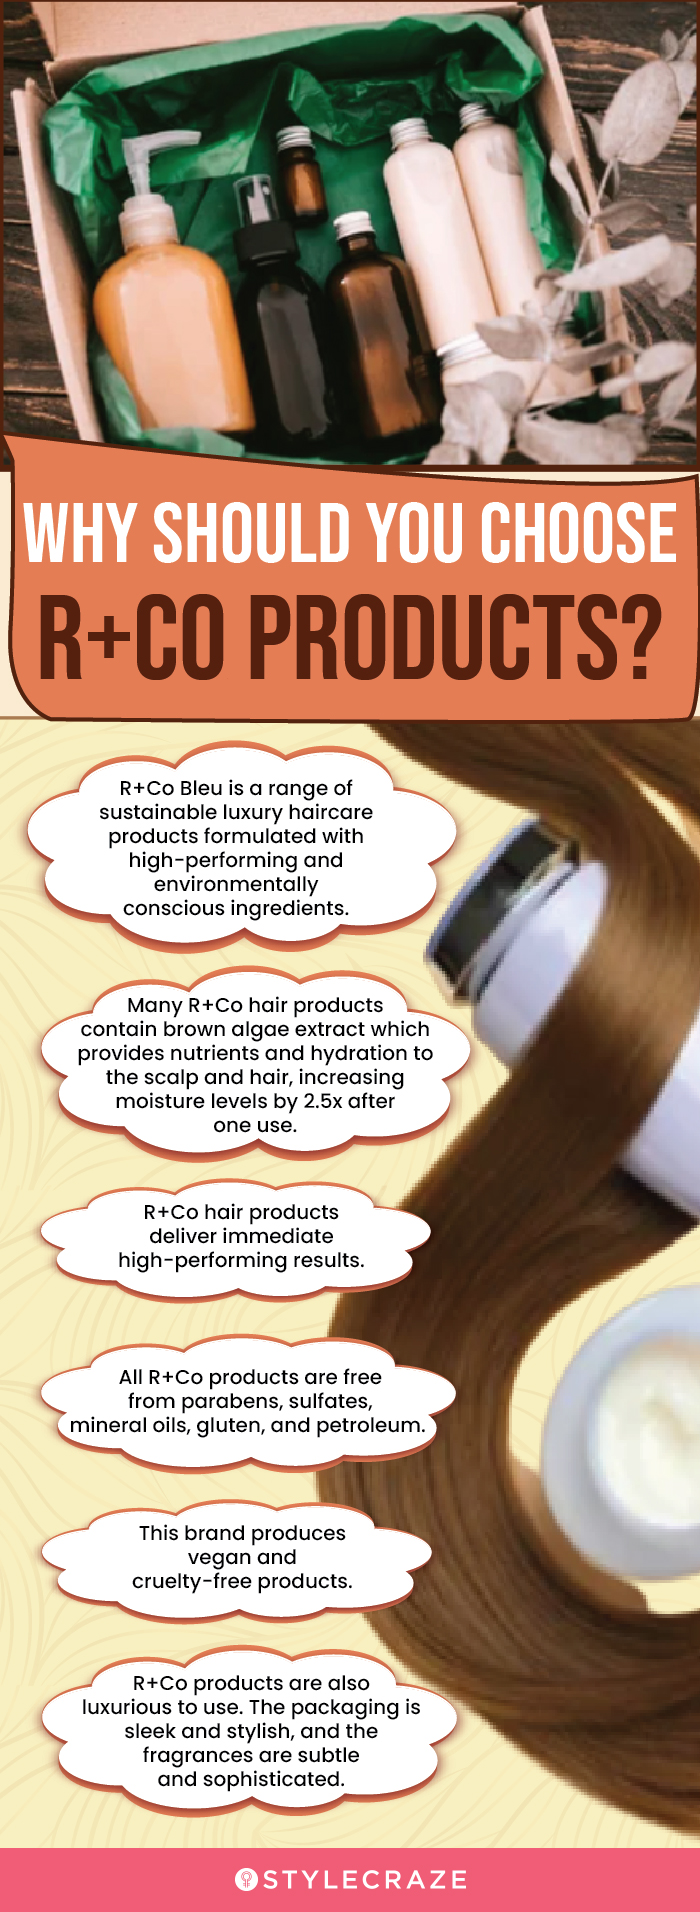  Why Should You Choose R+Co Products? (infographic)